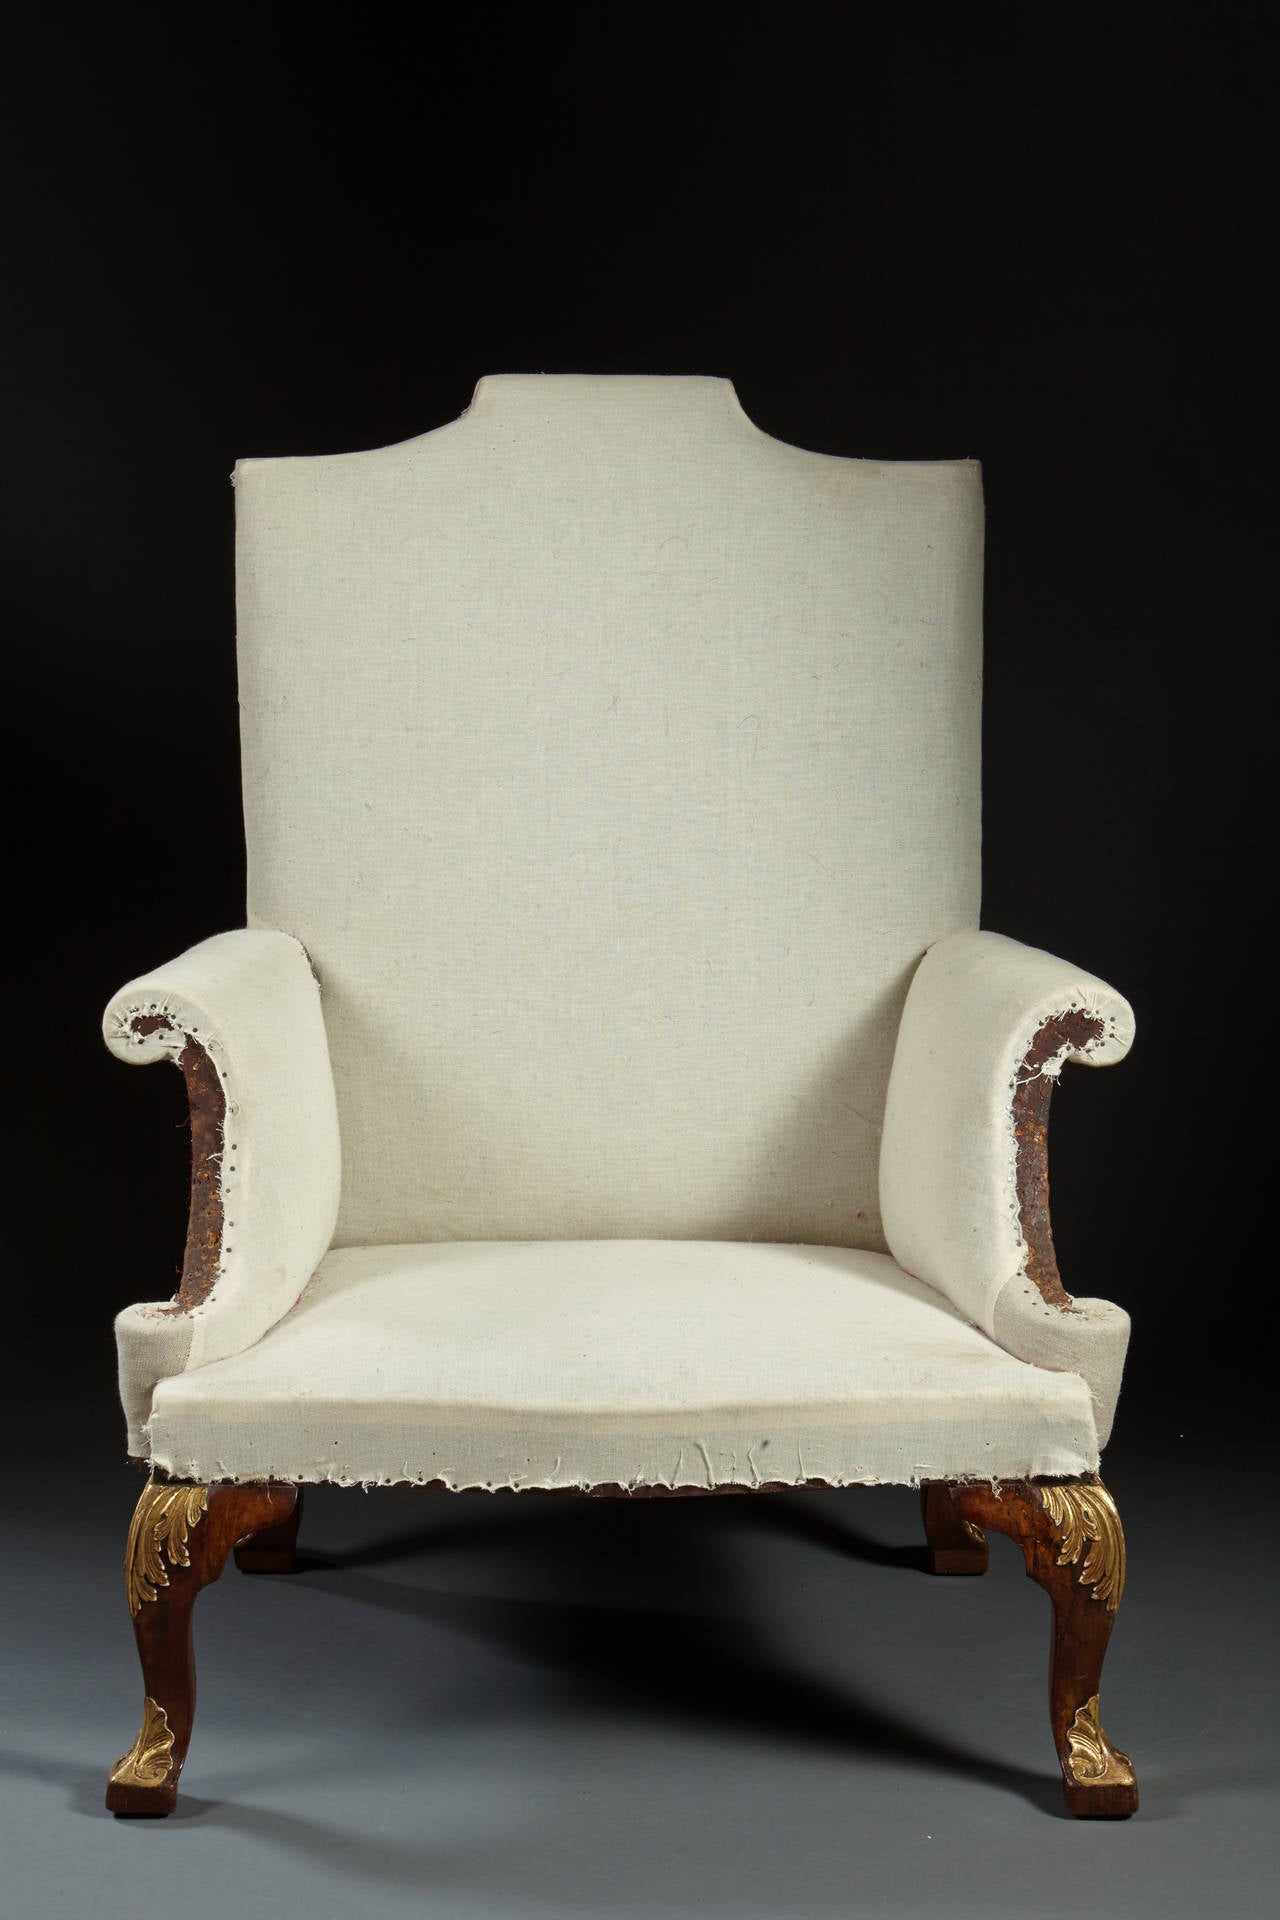 An important Kentian walnut easy chair with scrolled crest, flared arms and square cabriole legs with gilt carved acanthus knees, English, George II, circa 1735. A great find! All original and a rare example of the storied period of style.
Frame